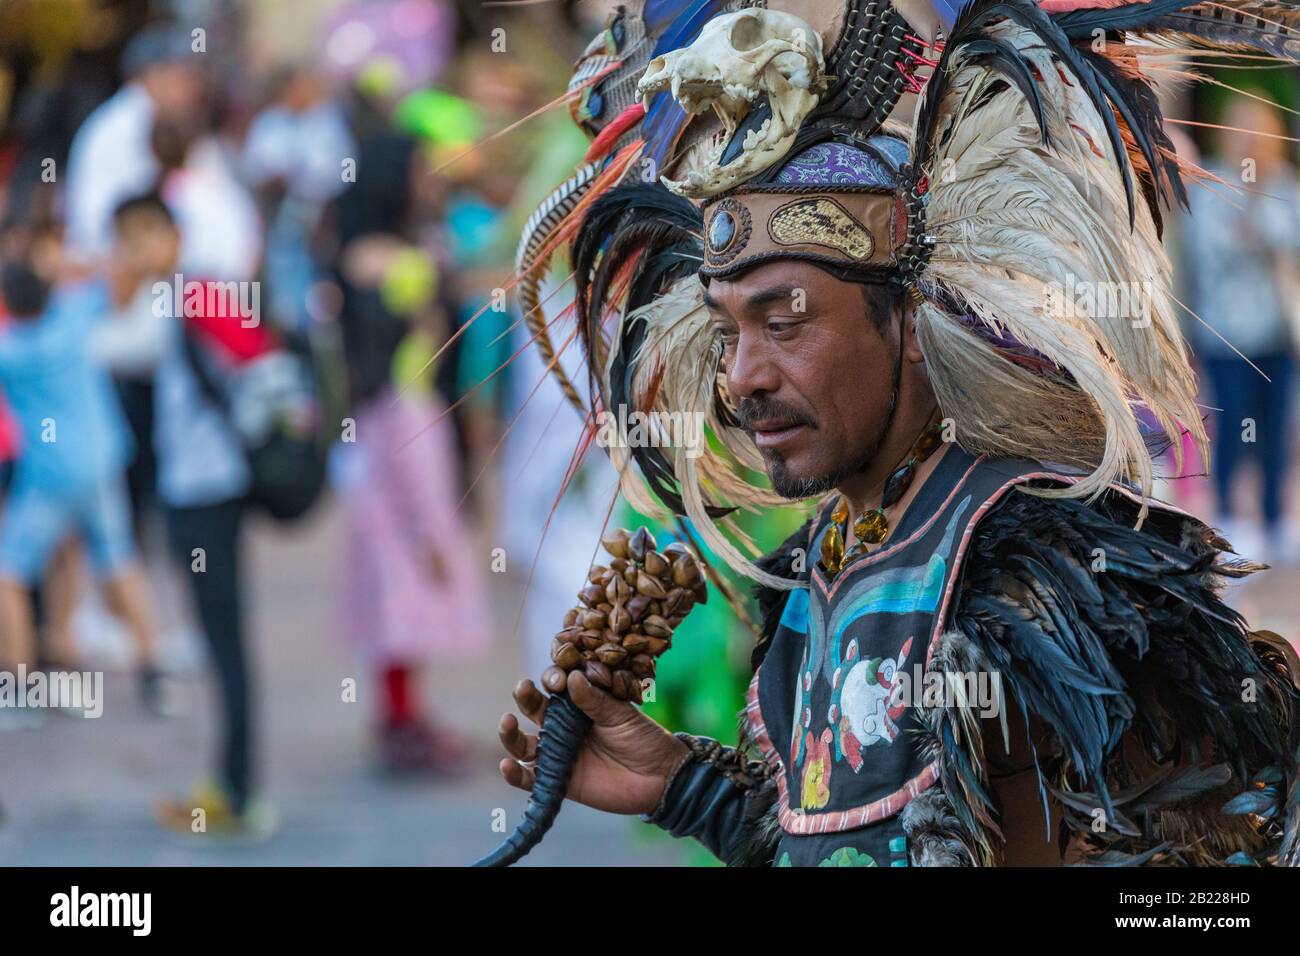 MEXICO CITY, MEXICO - FEBRUARY 17, 2020: Aztec dancers in traditional costumes dancing in the Zocalo in Mexico City, DF, Mexico. Stock Photo